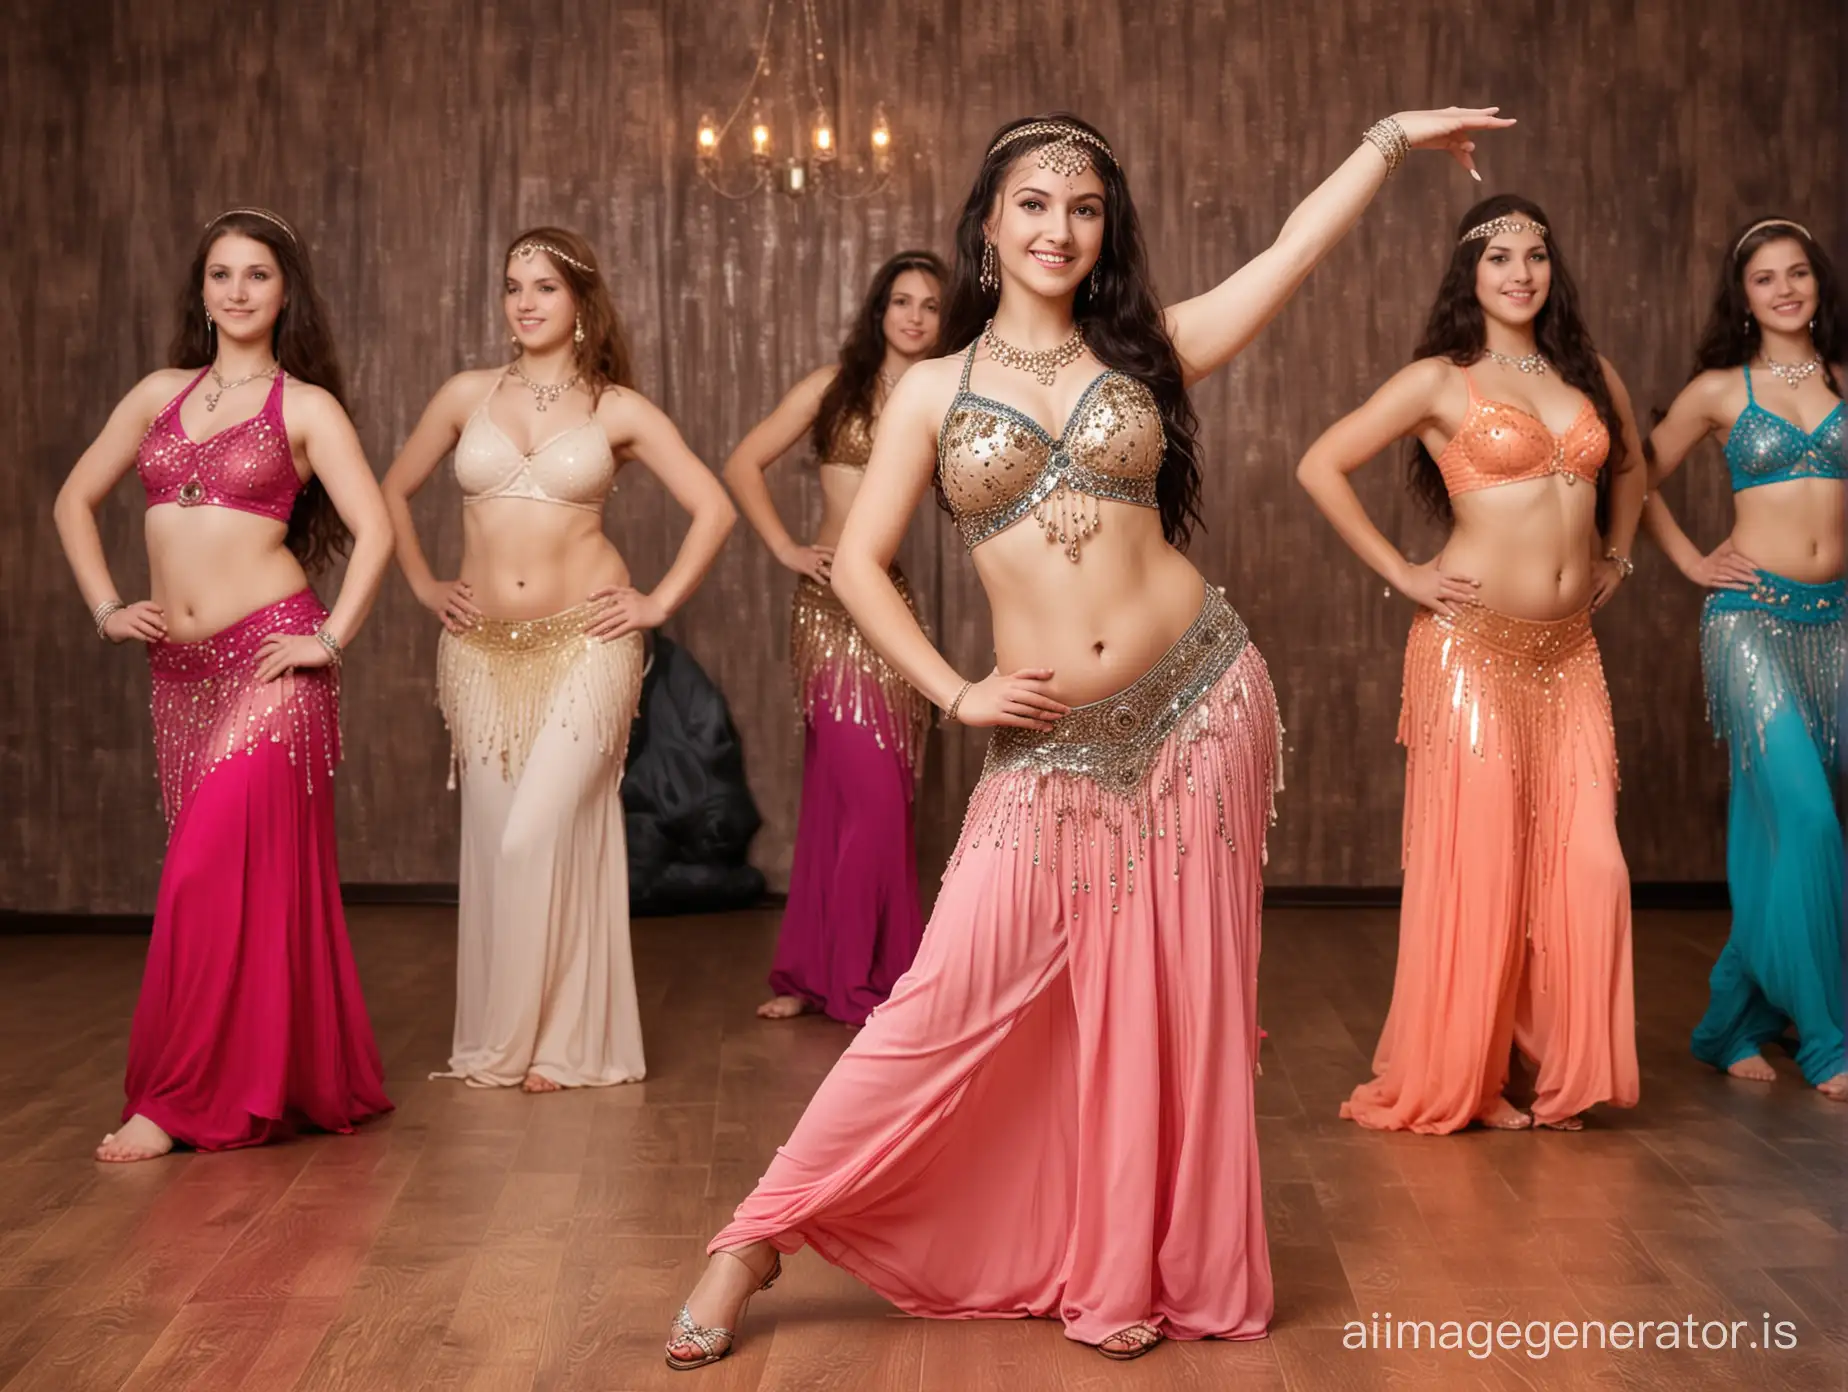 Belly dance class for curvy teen girly between thirteen and seventeen years old